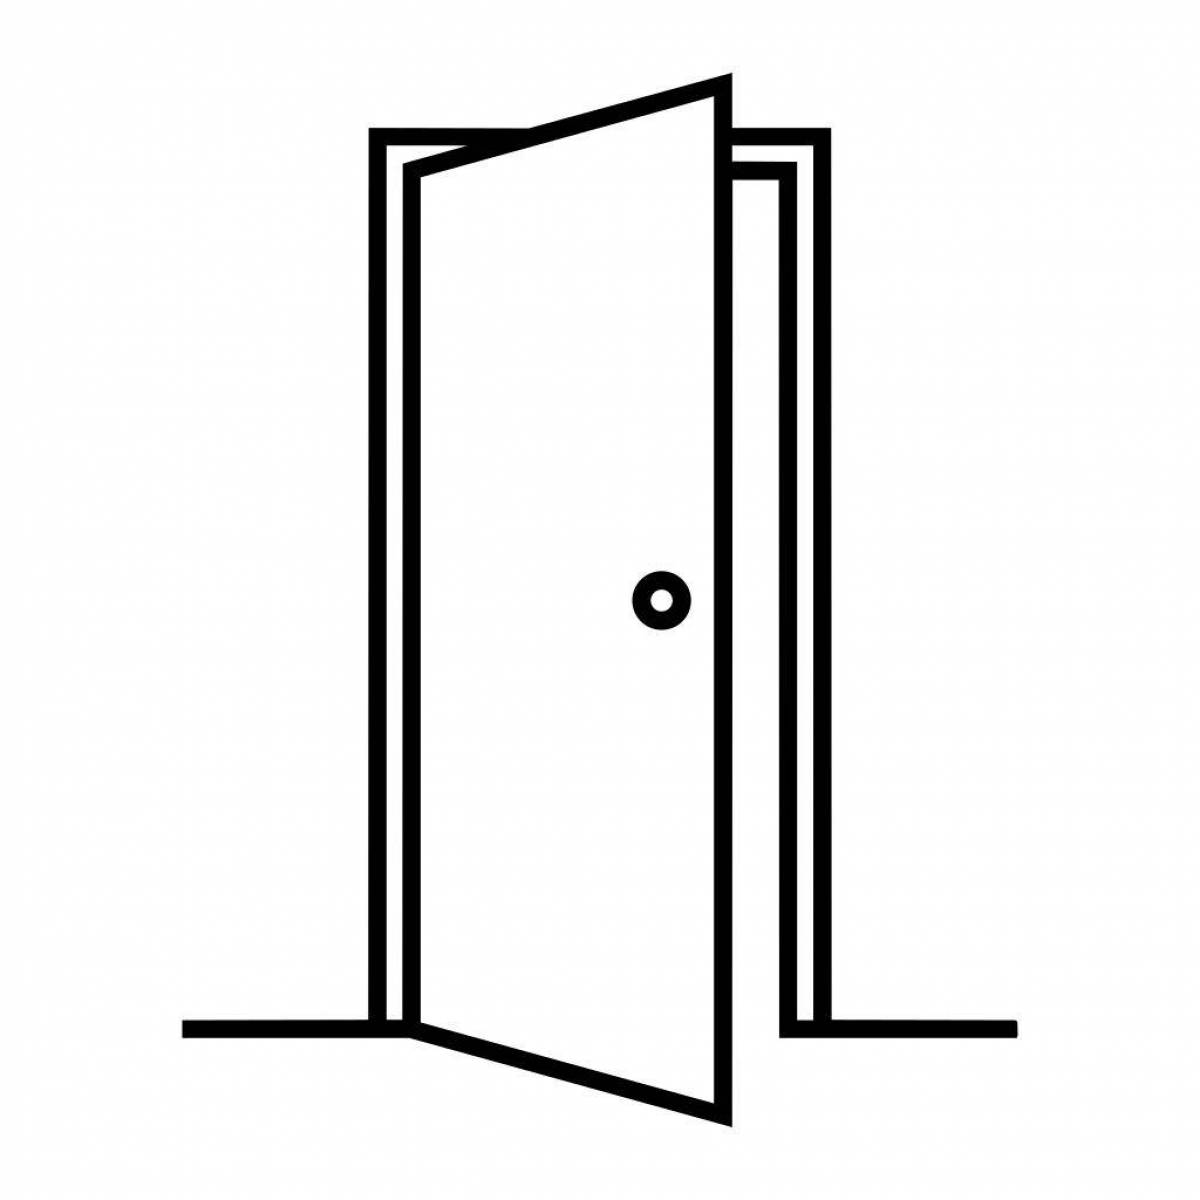 Adorable door coloring page for kids